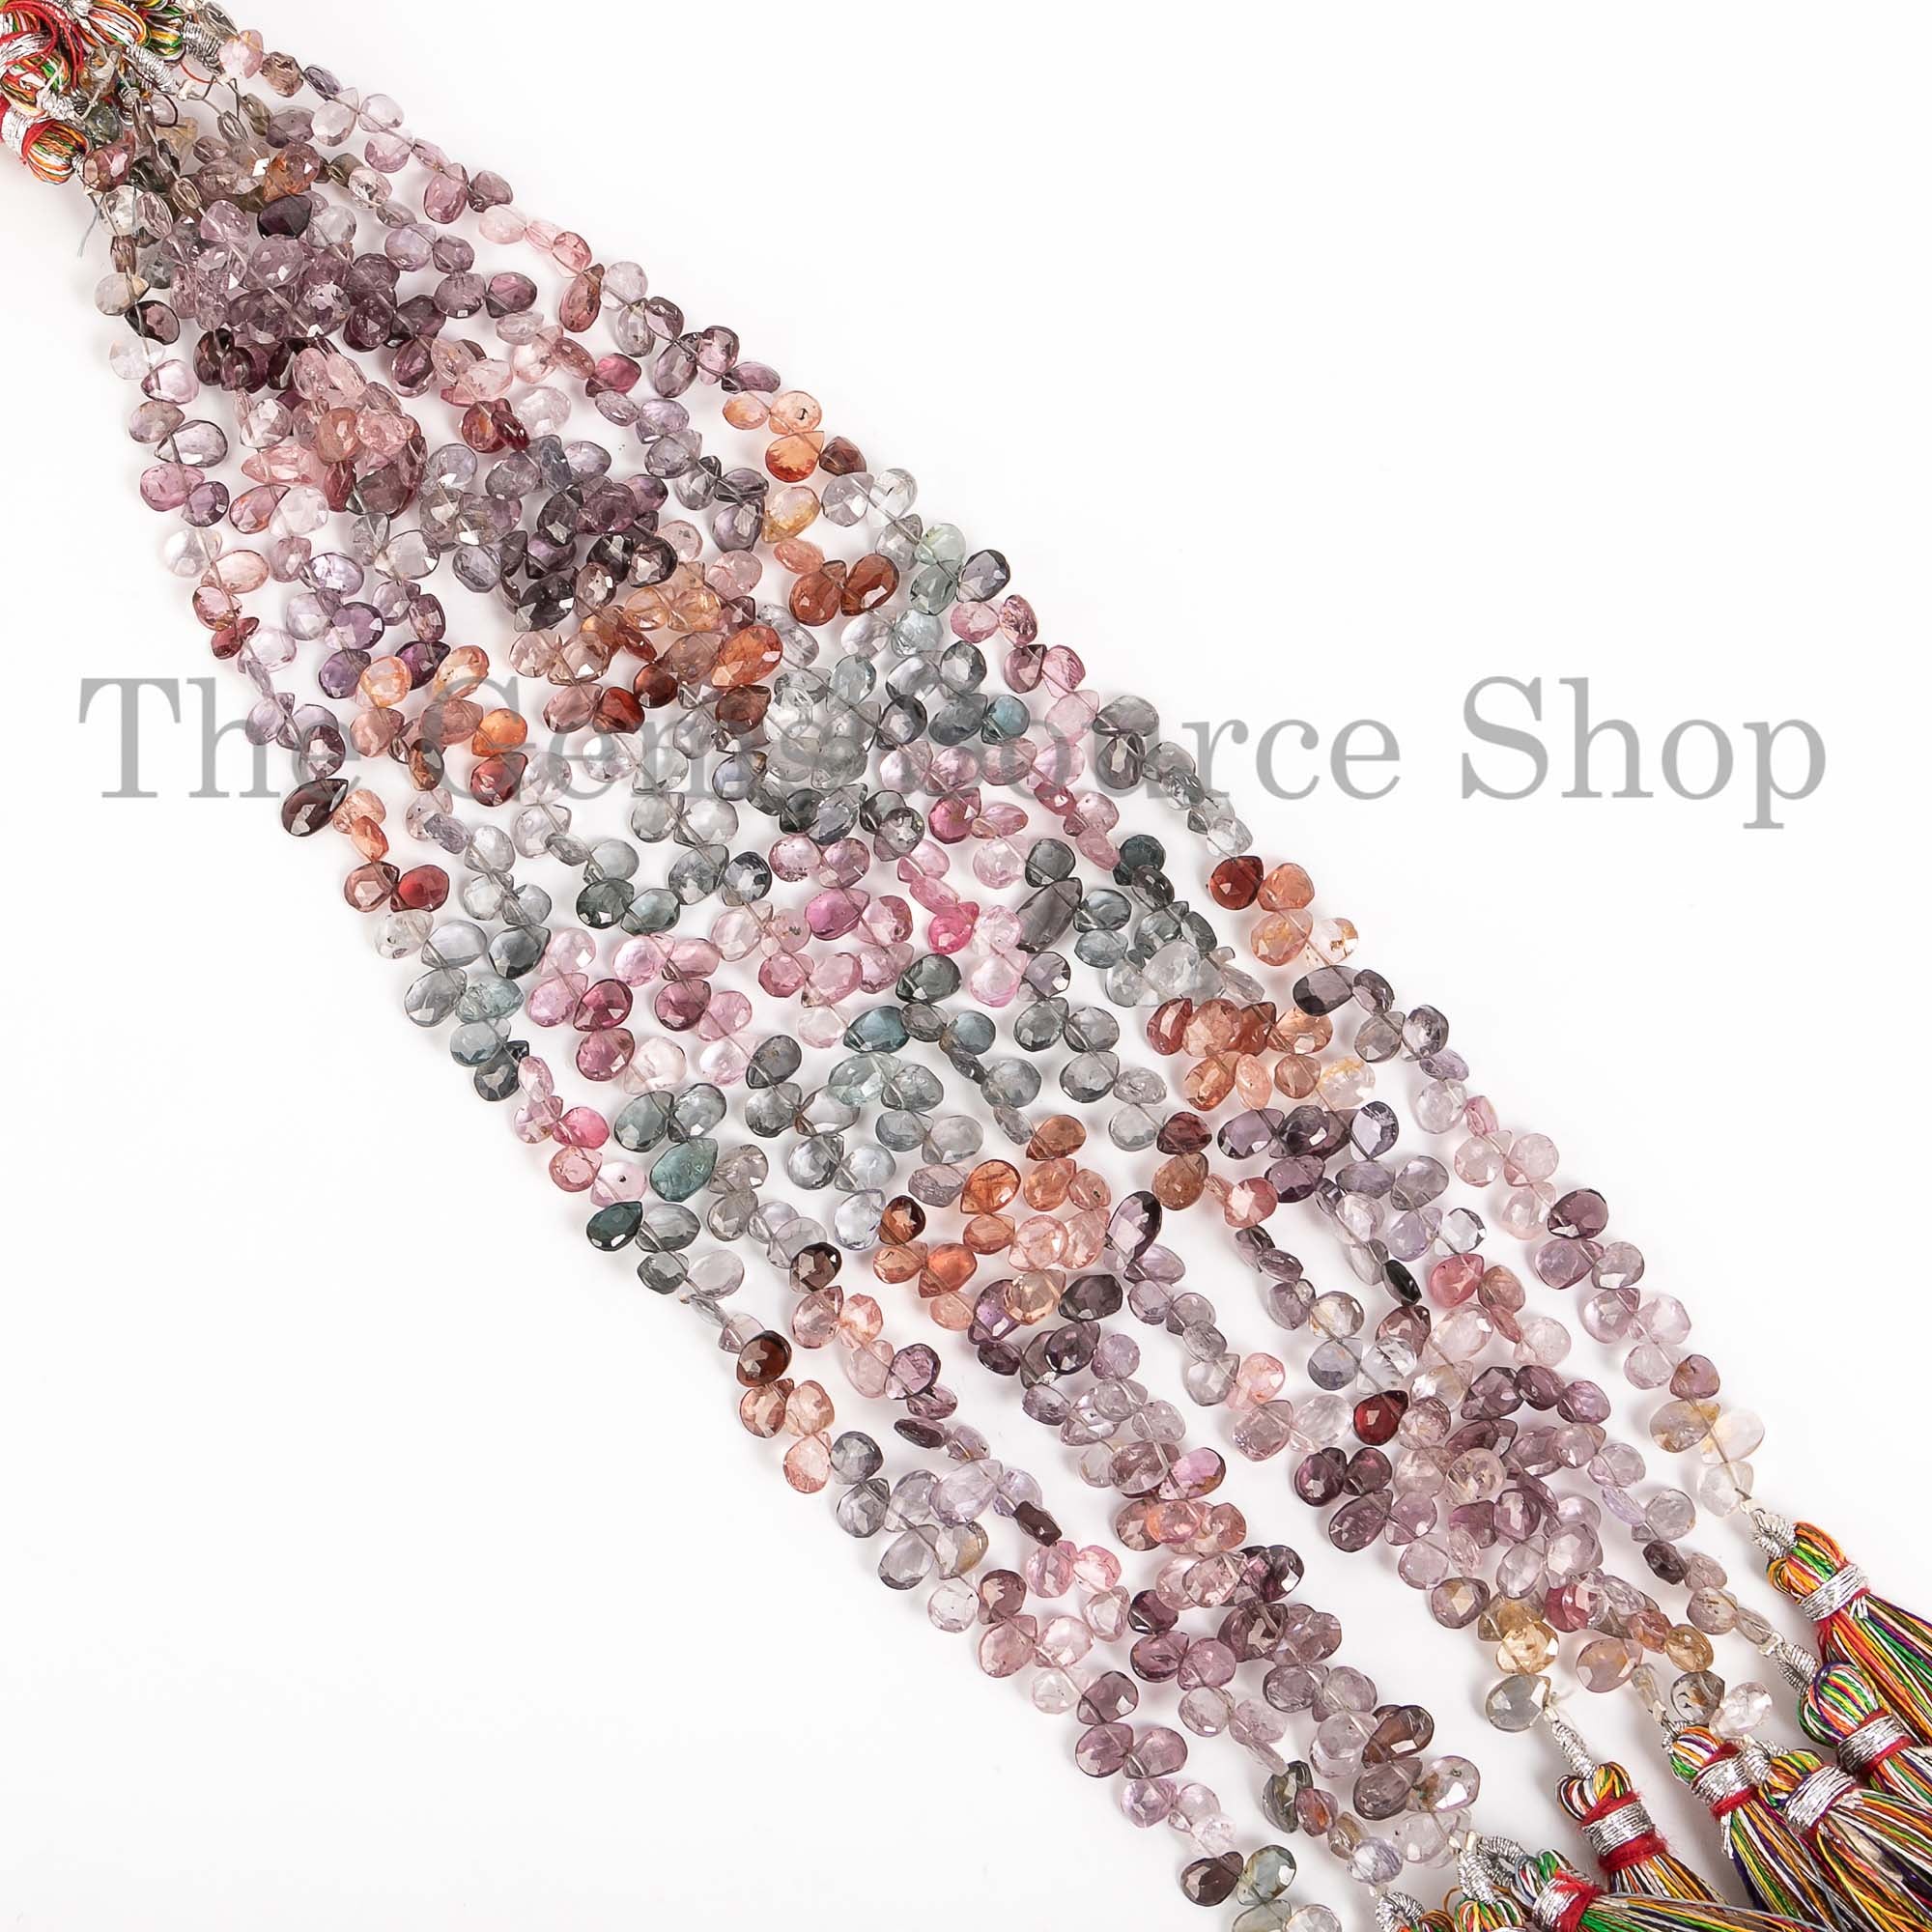 Natural Multi Spinel Beads, Multi Spinel Faceted Beads, Spinel Rondelle Shape Beads, Wholesale Beads